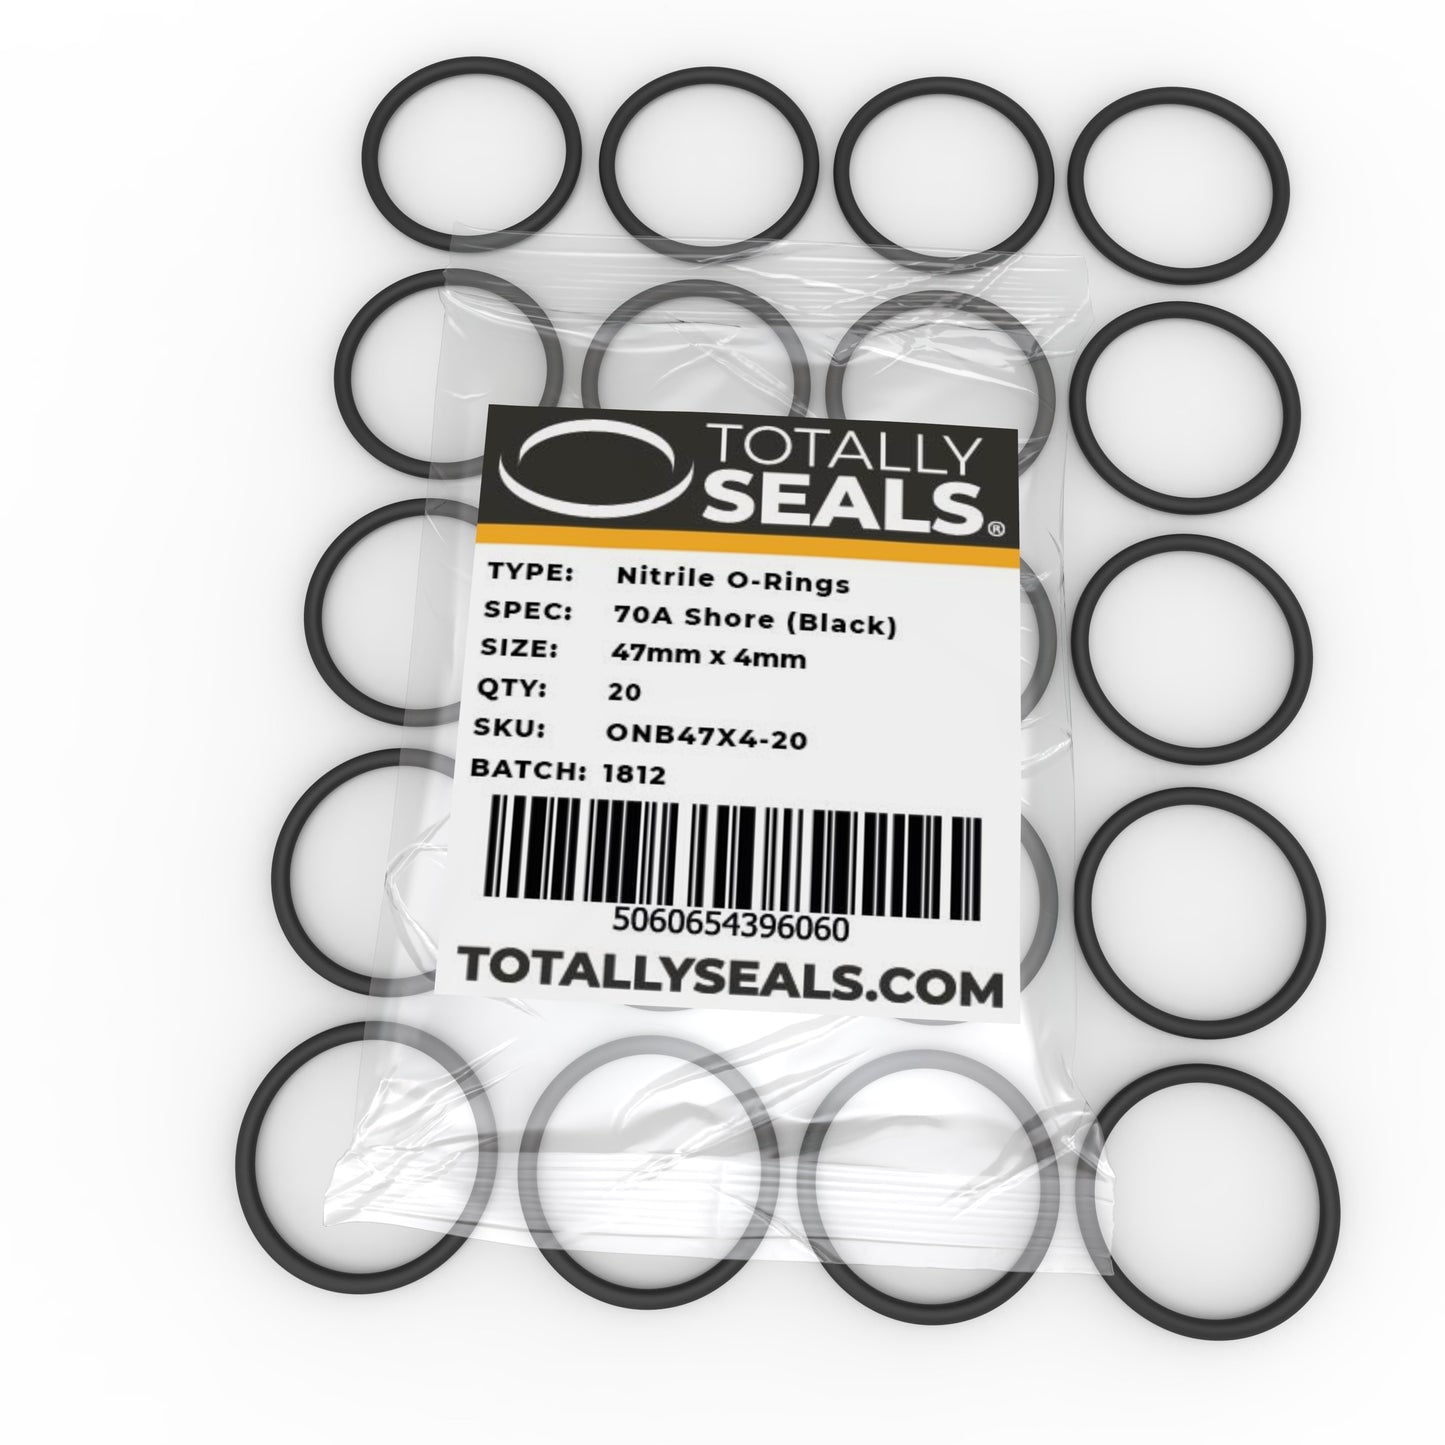 47mm x 4mm (55mm OD) Nitrile O-Rings - Totally Seals®